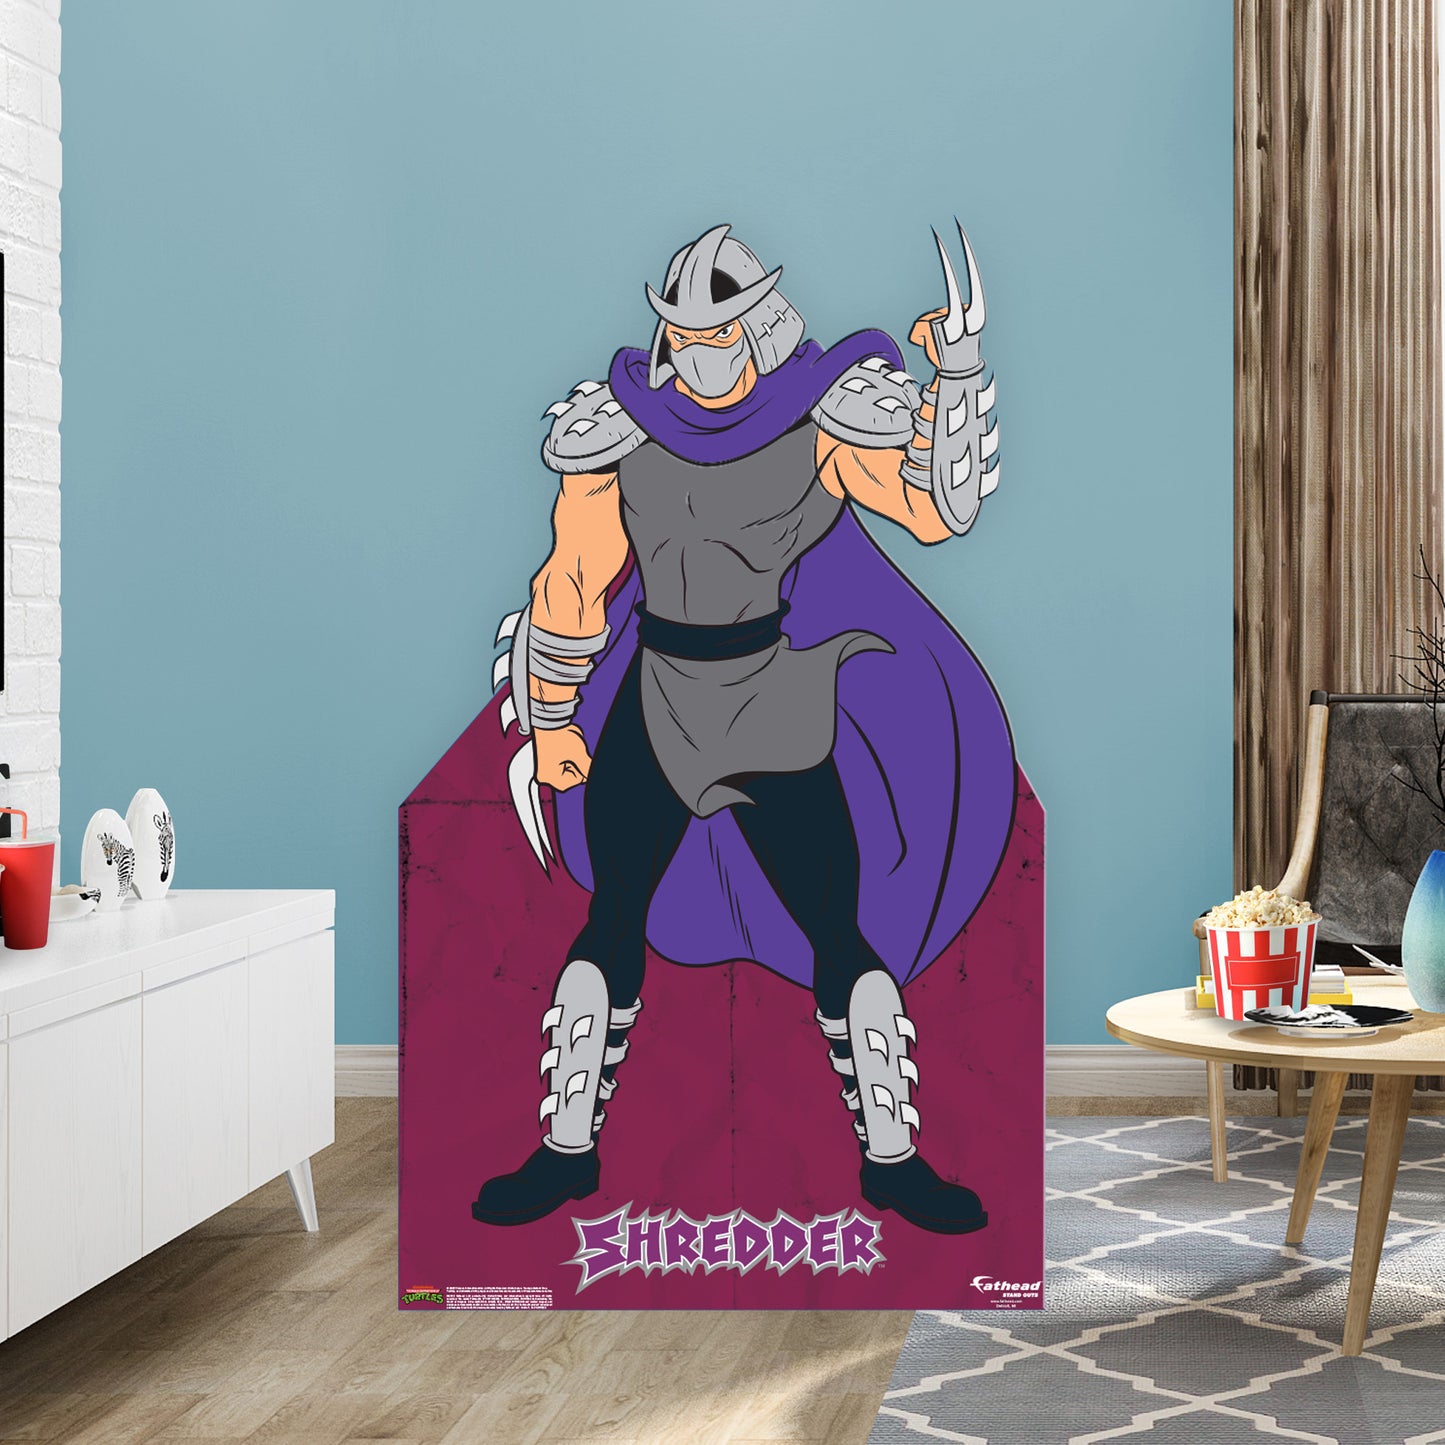 Teenage Mutant Ninja Turtles: Shredder Life-Size   Foam Core Cutout  - Officially Licensed Nickelodeon    Stand Out